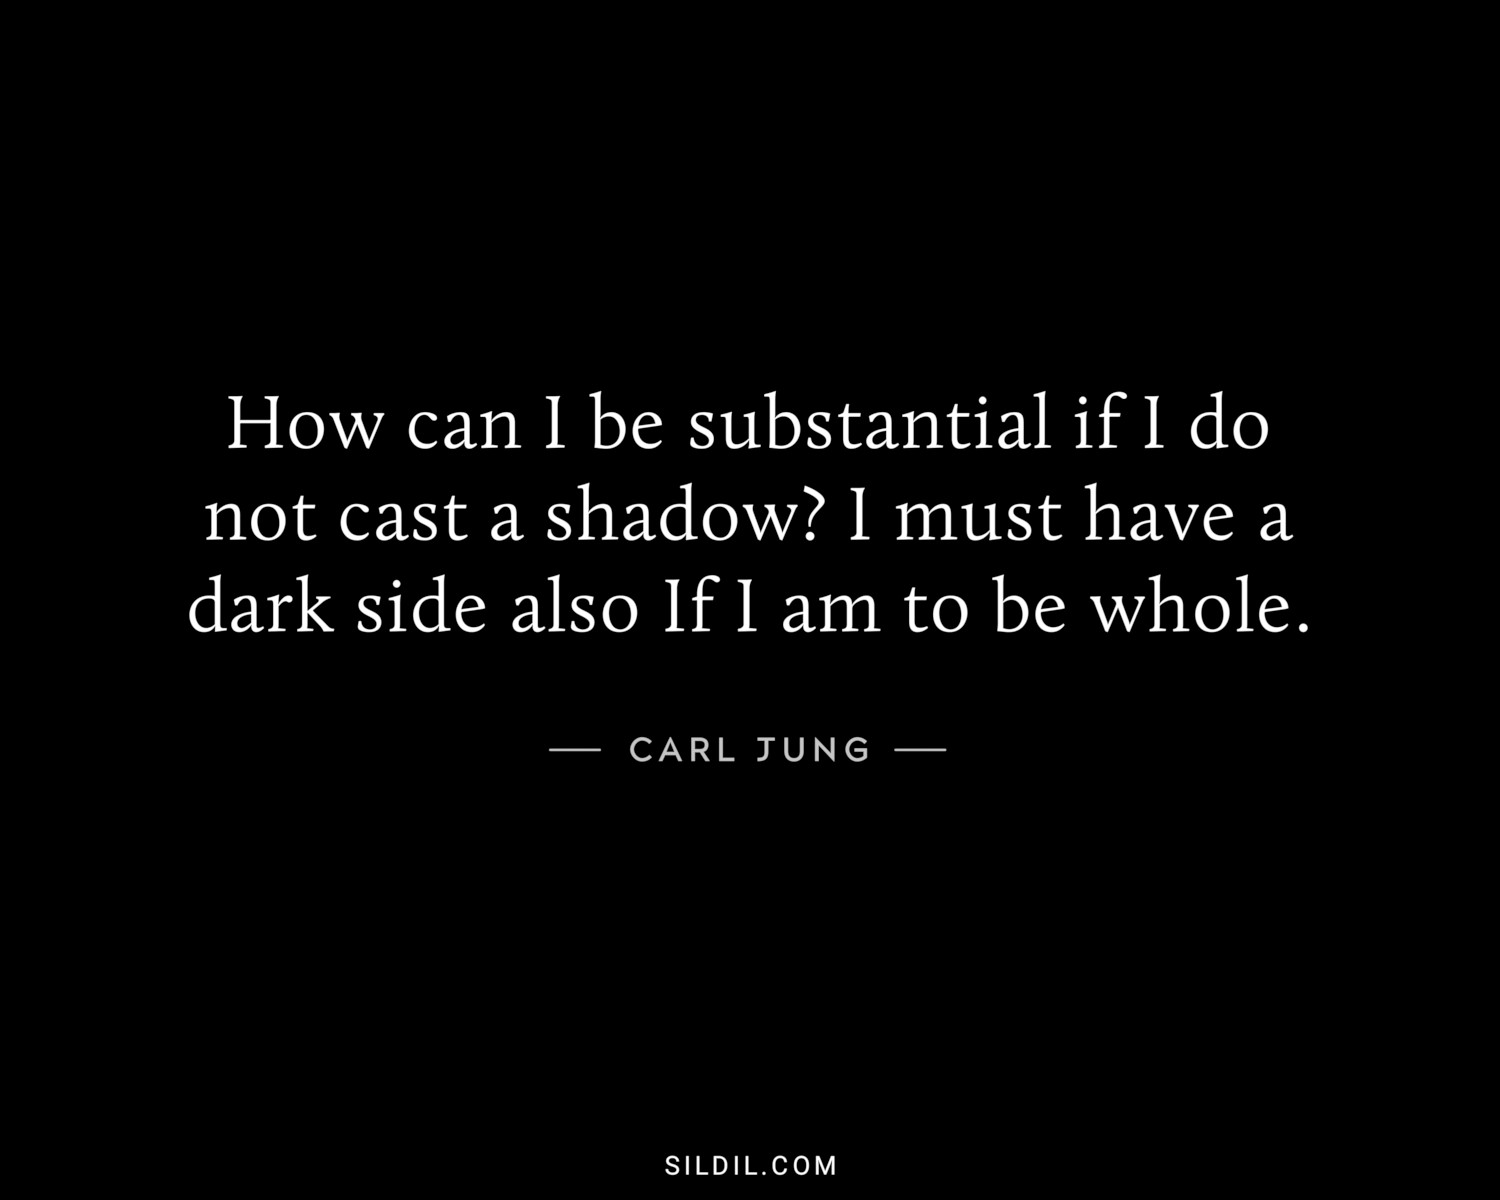 How can I be substantial if I do not cast a shadow? I must have a dark side also If I am to be whole.